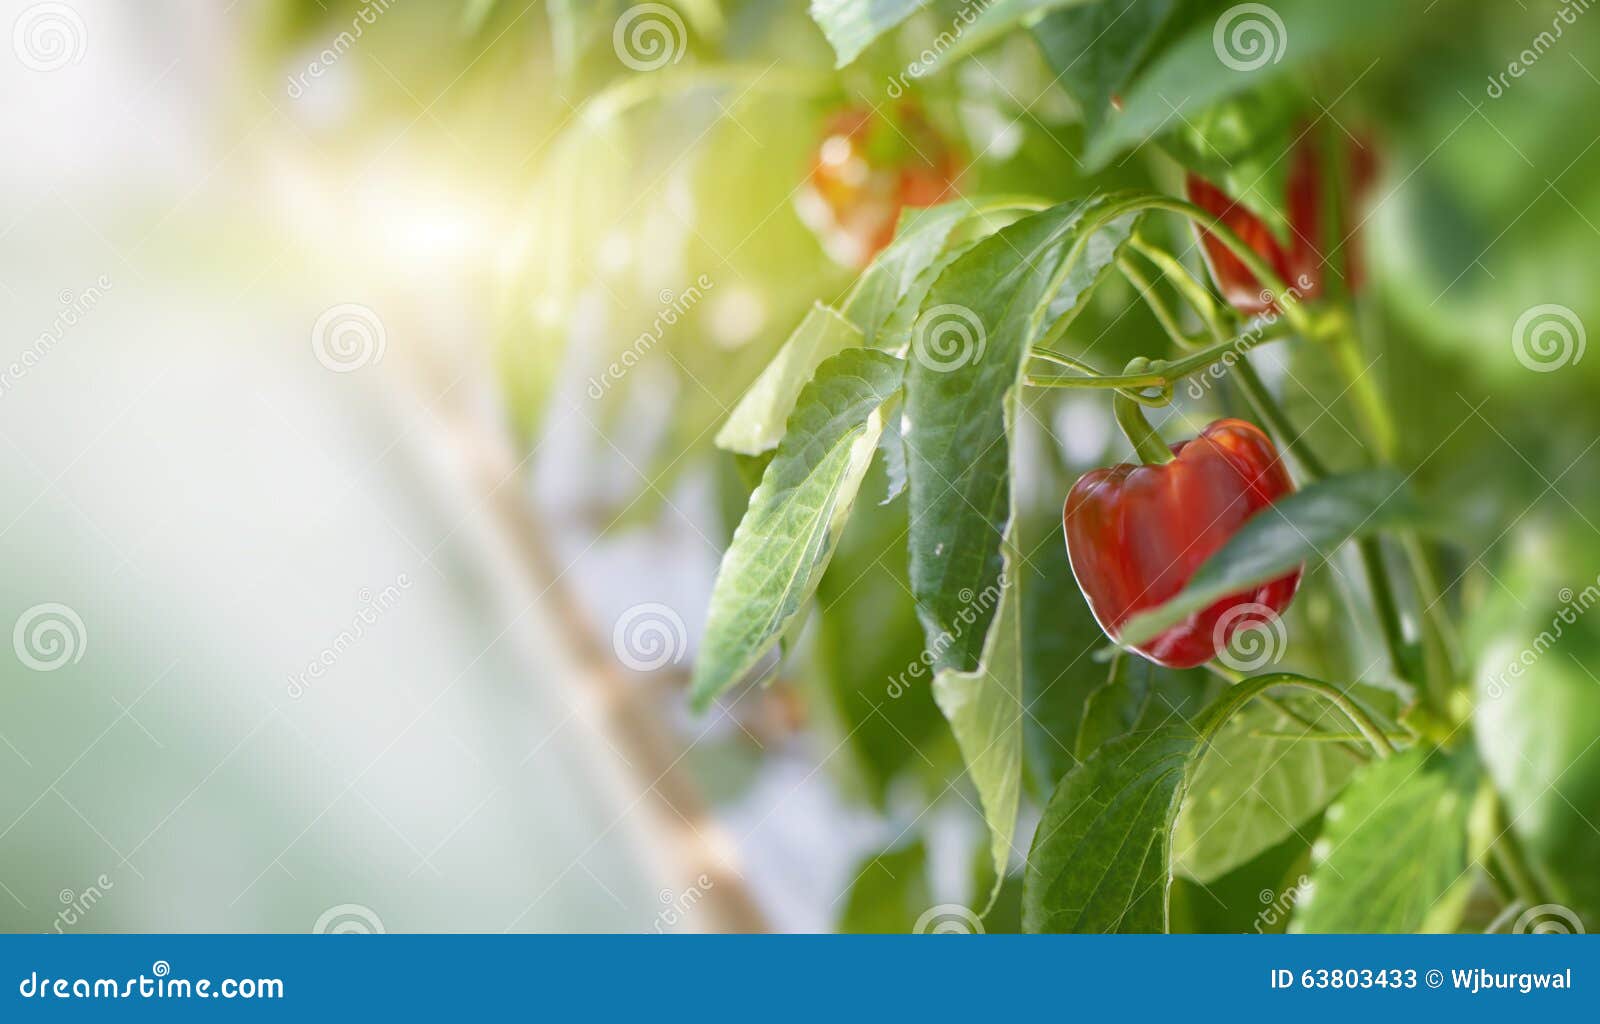 red bell peppers growing on a plant